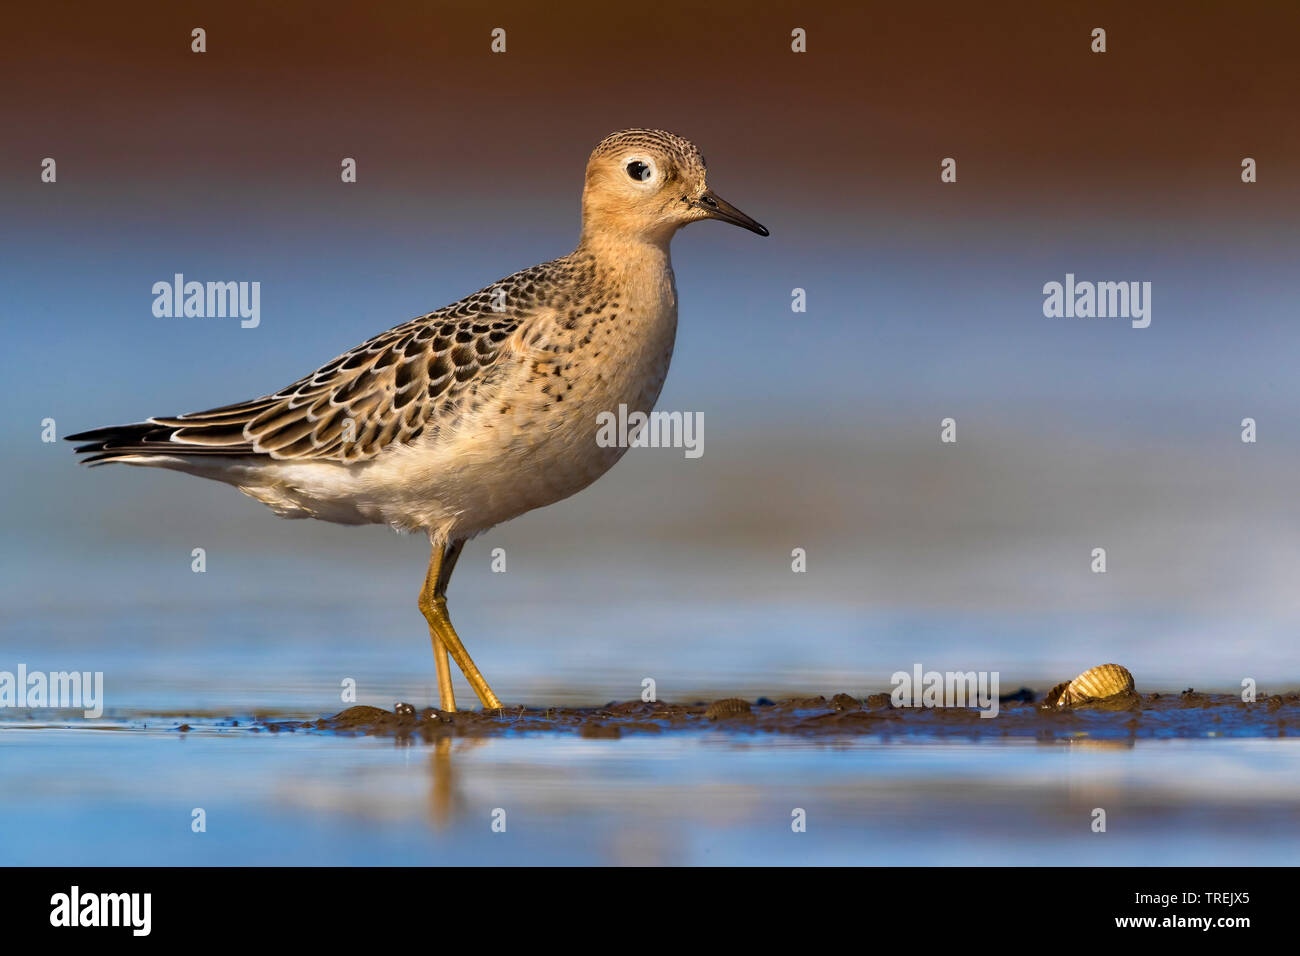 buff-breasted sandpiper (Tryngites subruficollis), standing in shallow water, Italy Stock Photo